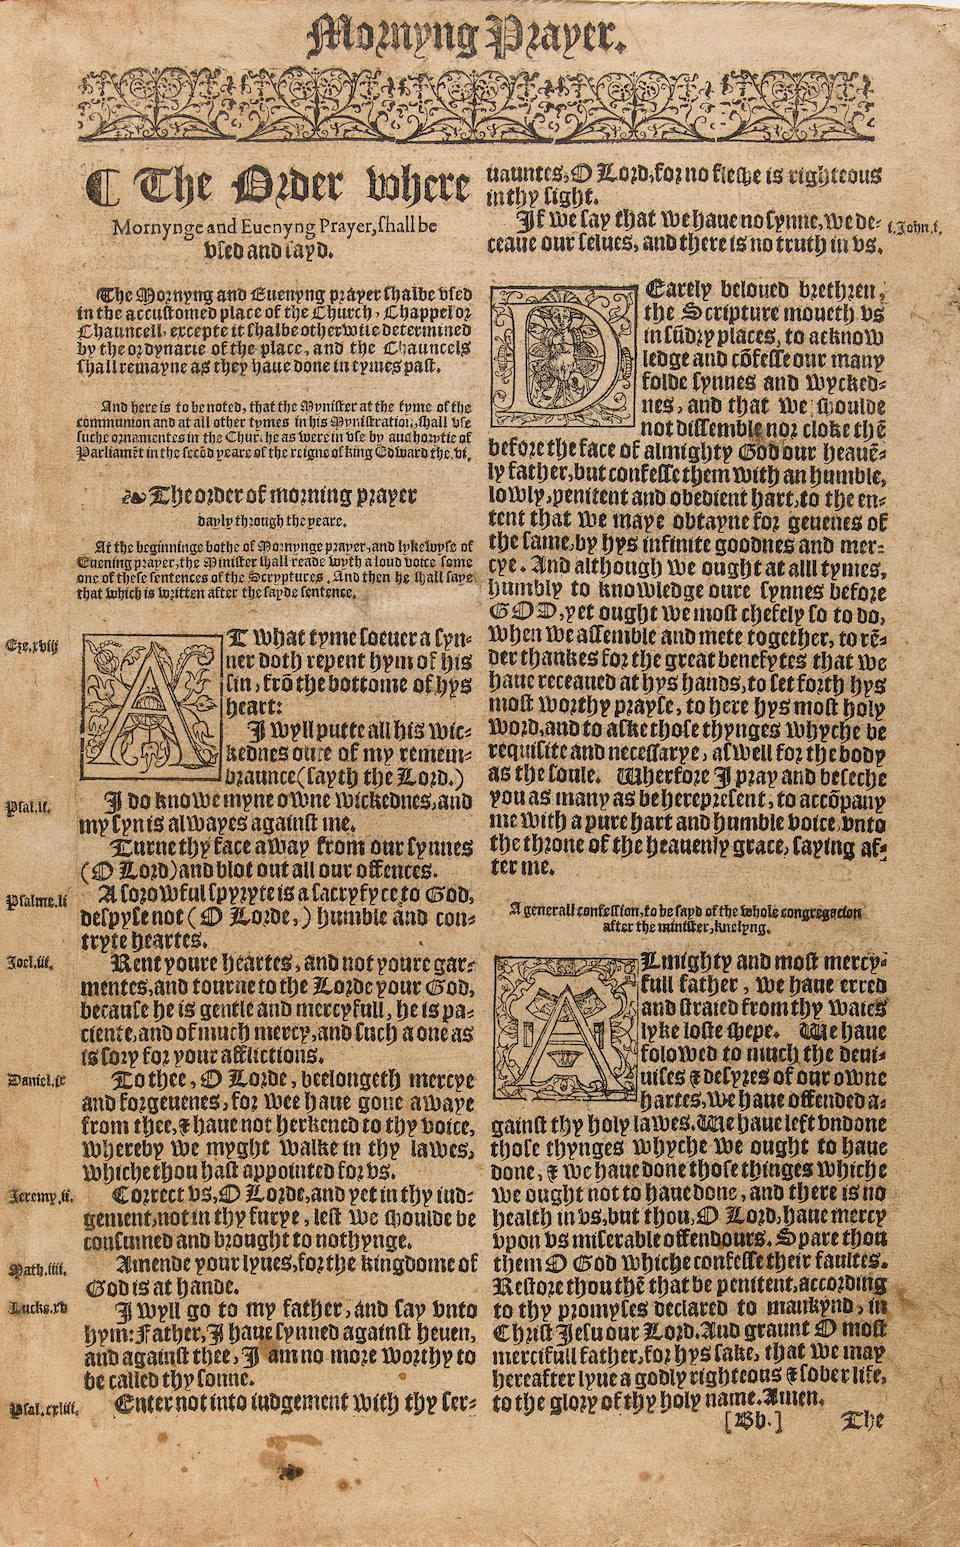 BIBLE IN ENGLISH&#8212;GREAT BIBLE. [The Bible in Englyshe of the Largest and Greatest Volume. Rouen: Richard Carmarden, 1566.]